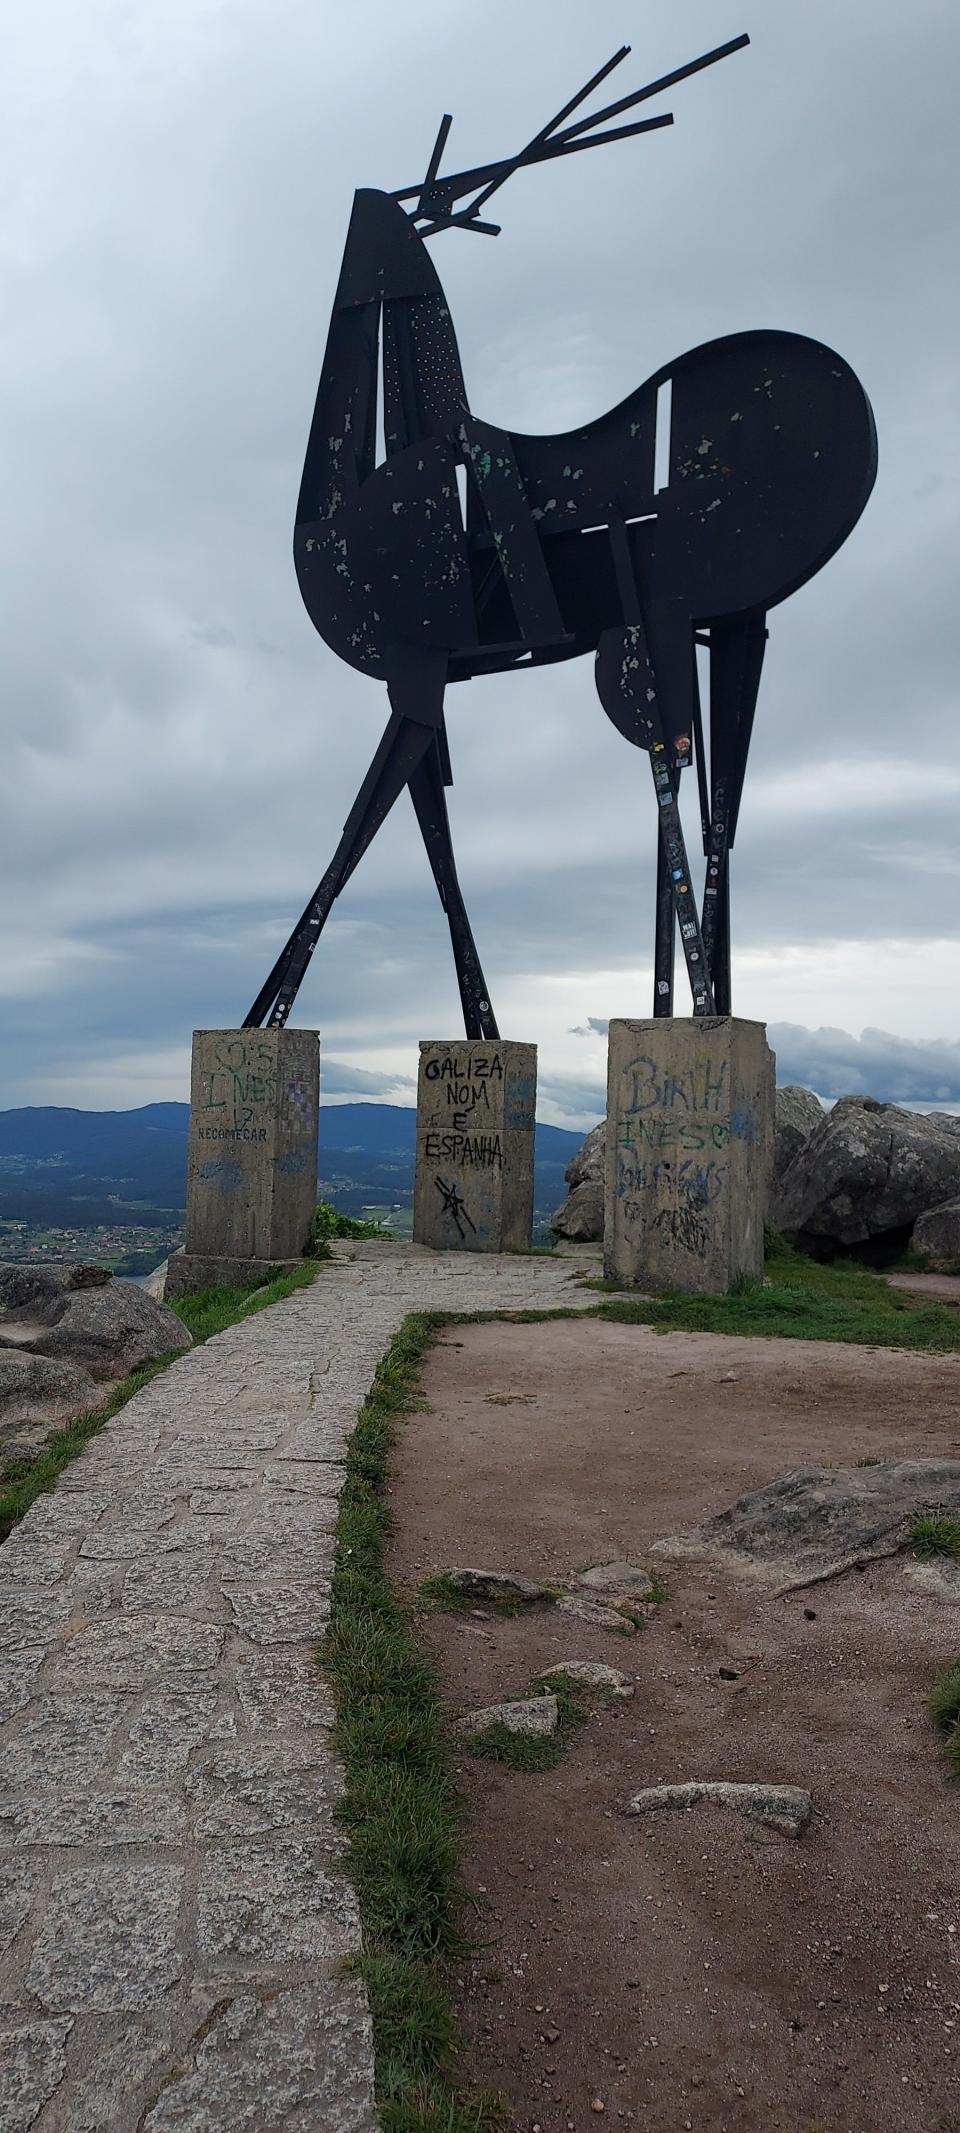 A large stag statue sits at the top of a high hill to Villa Nova De Cervera known as the village of the Portuguese stag along the Camino de Santiago.